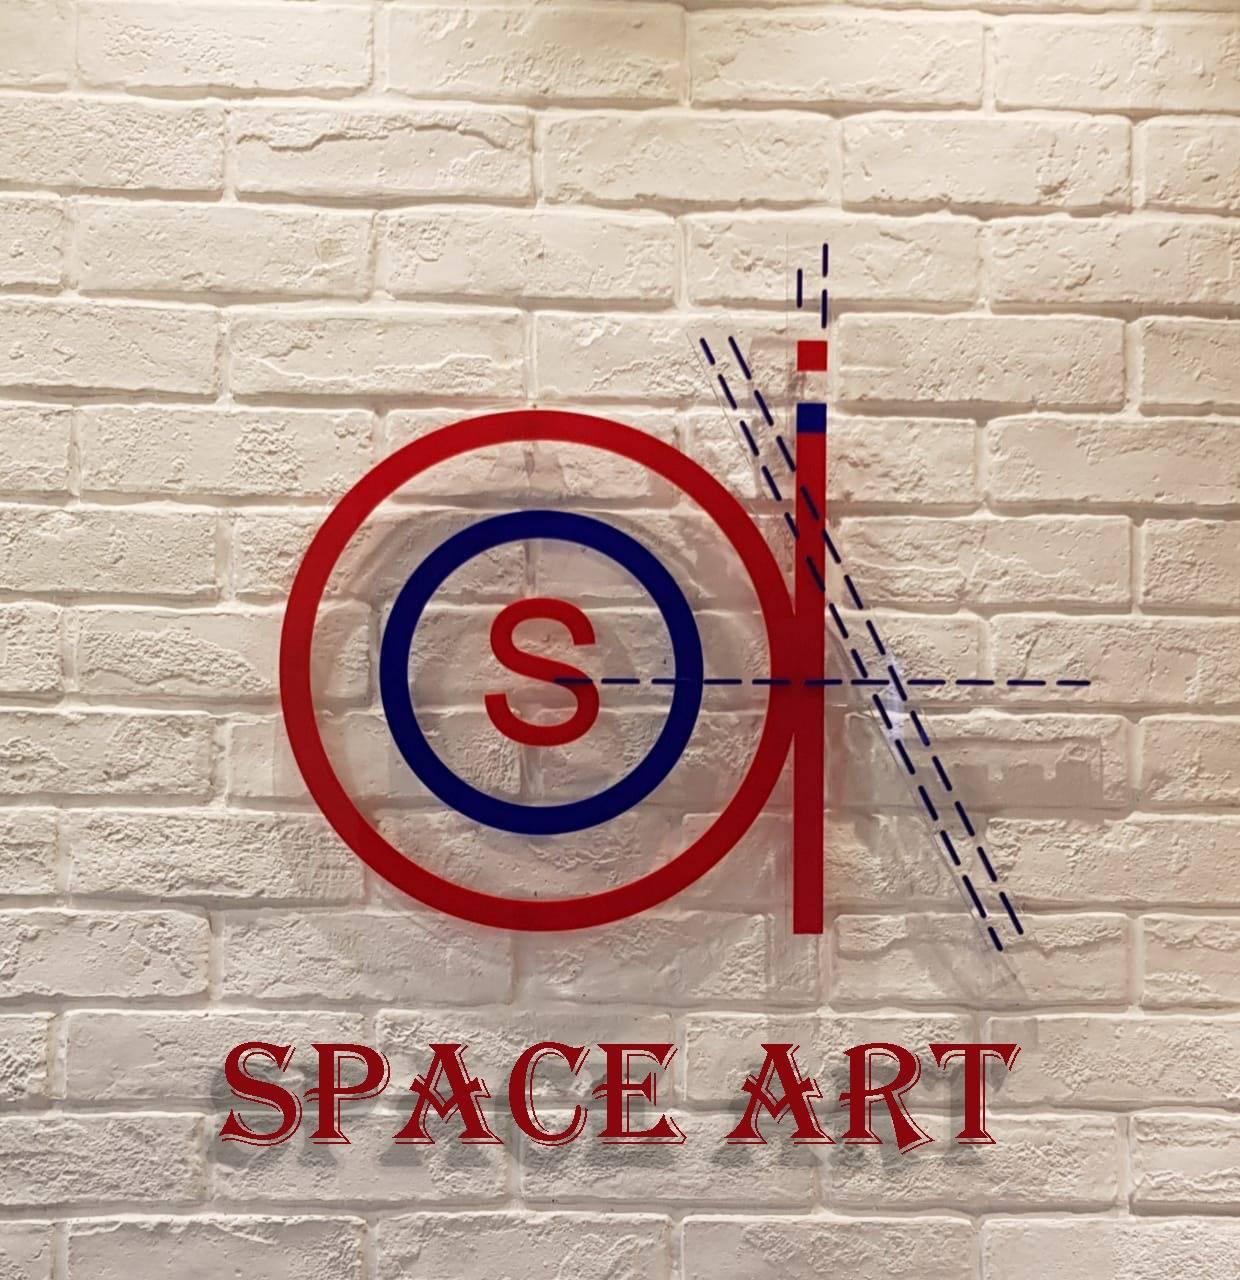 Space Art interior designers & Architects|Legal Services|Professional Services